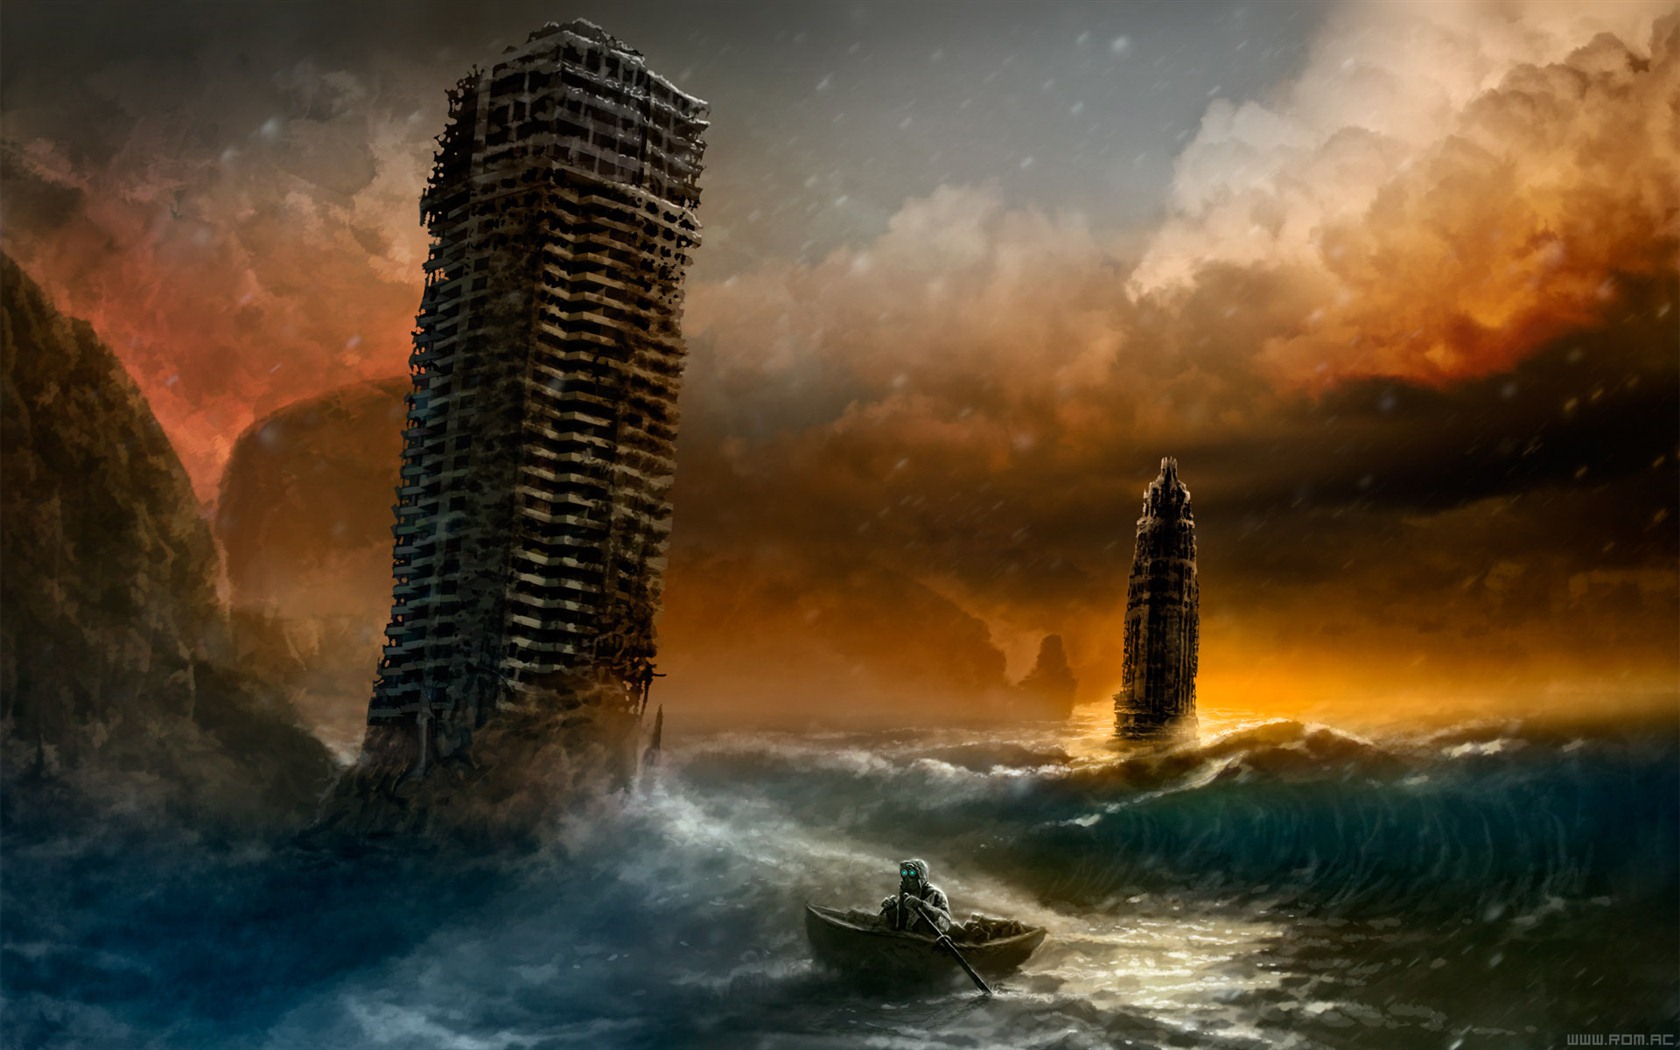 Romantically Apocalyptic creative painting wallpapers (1) #8 - 1680x1050